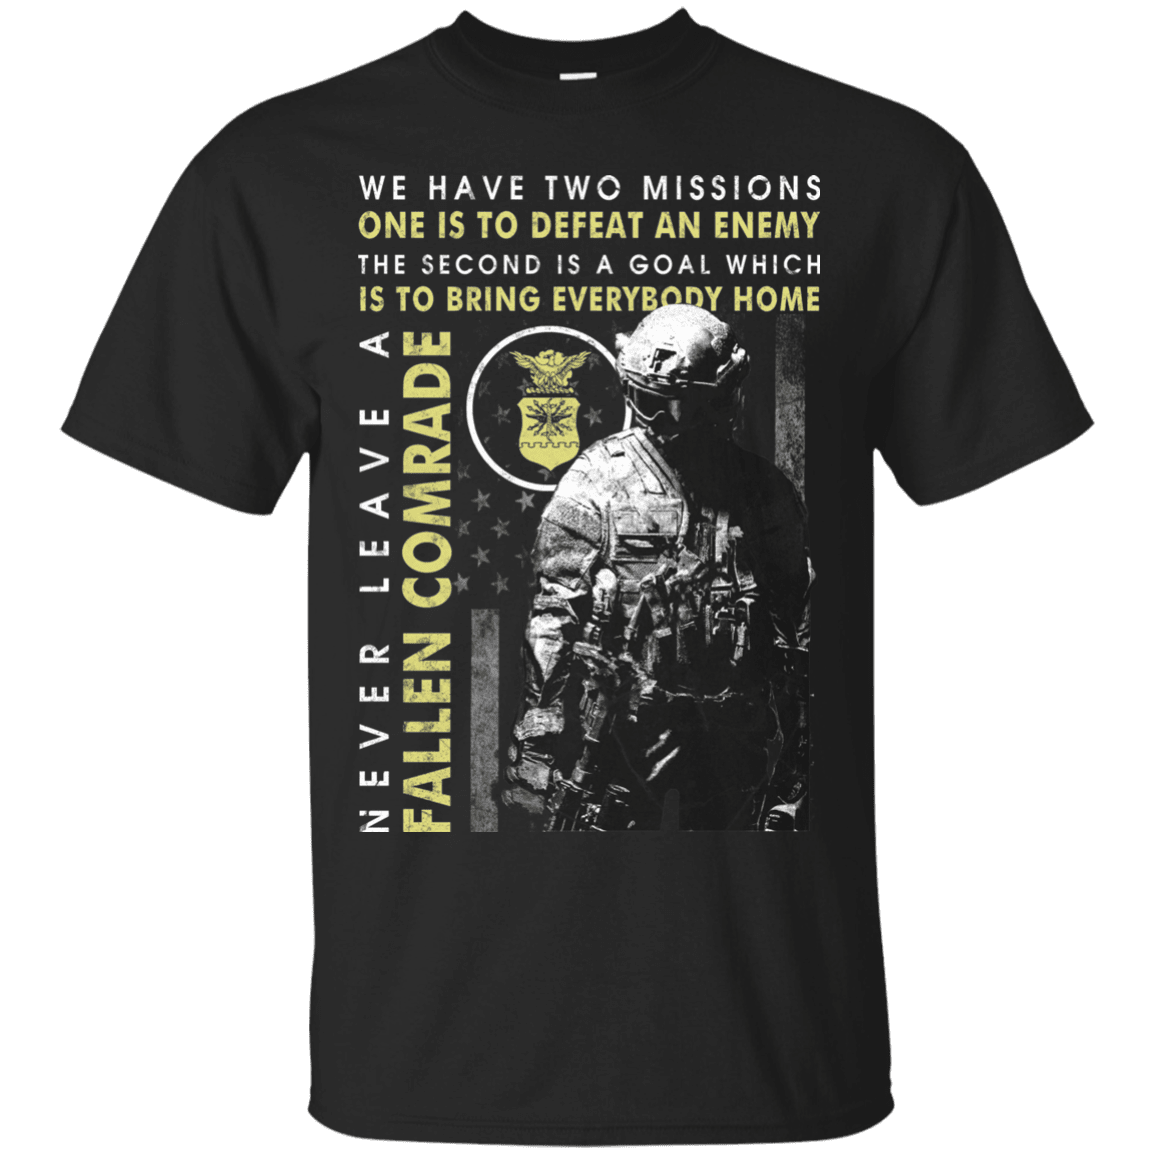 Never Leave A Fallen Comrade Air Force Men Front T Shirts-TShirt-USAF-Veterans Nation